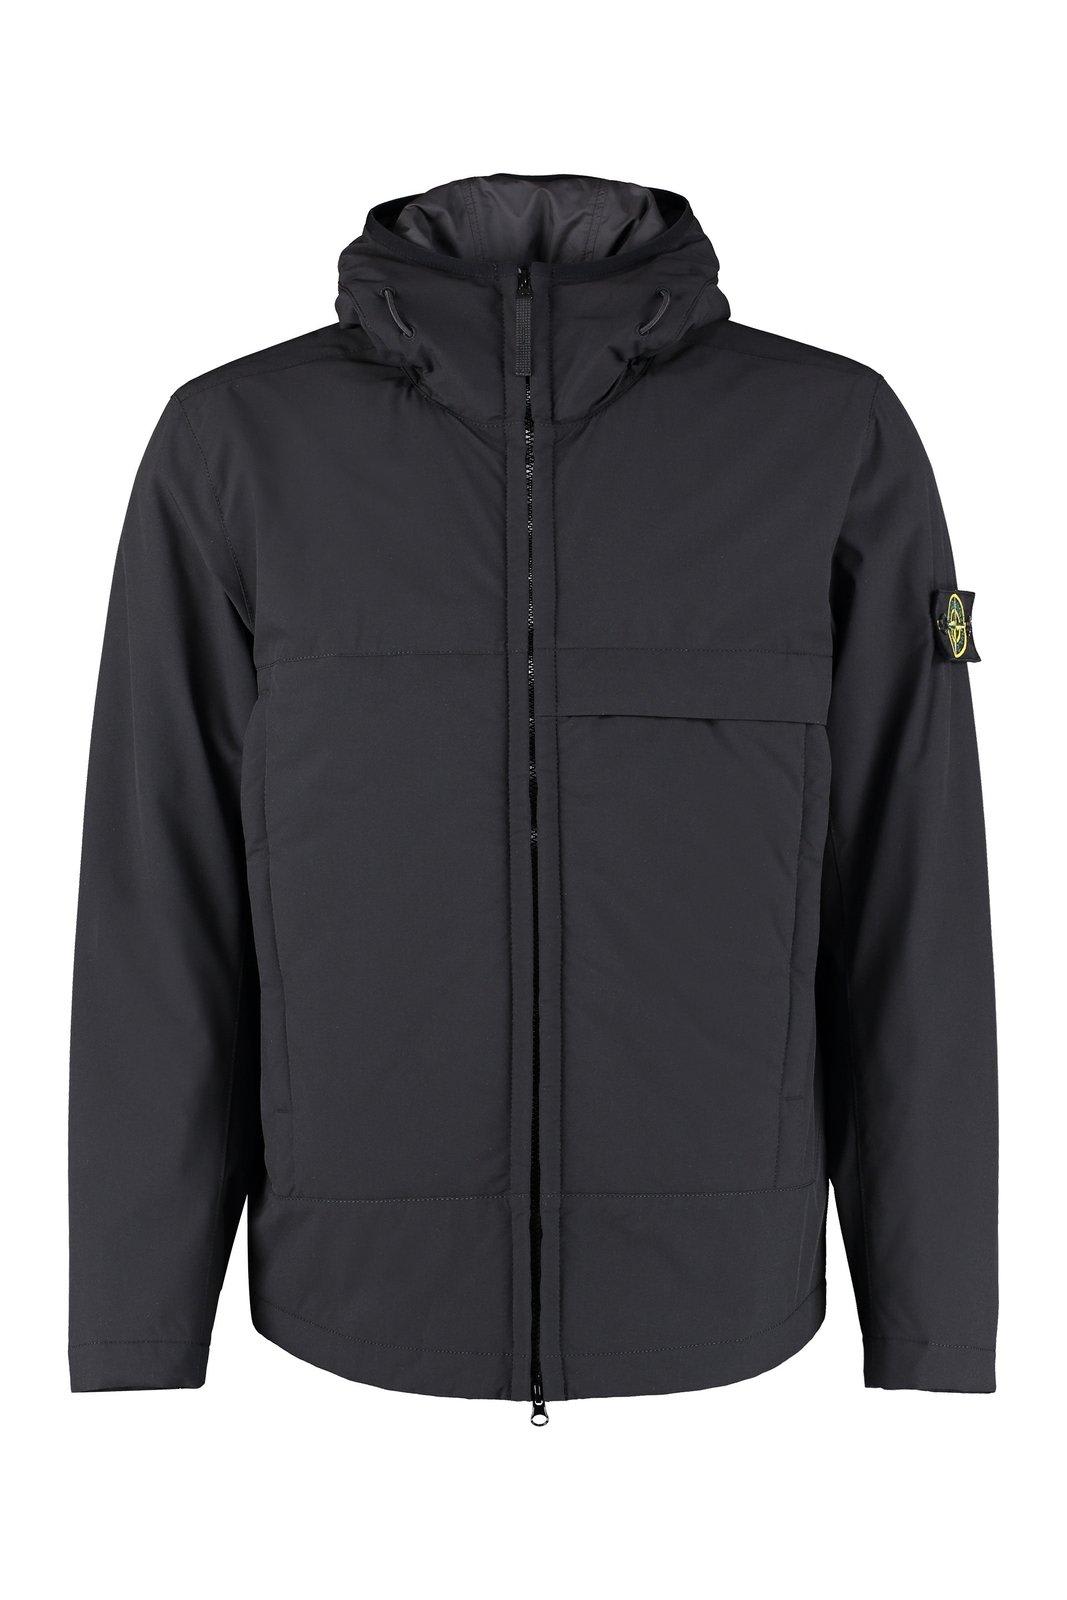 Stone Island Compass-patch Hooded Jacket